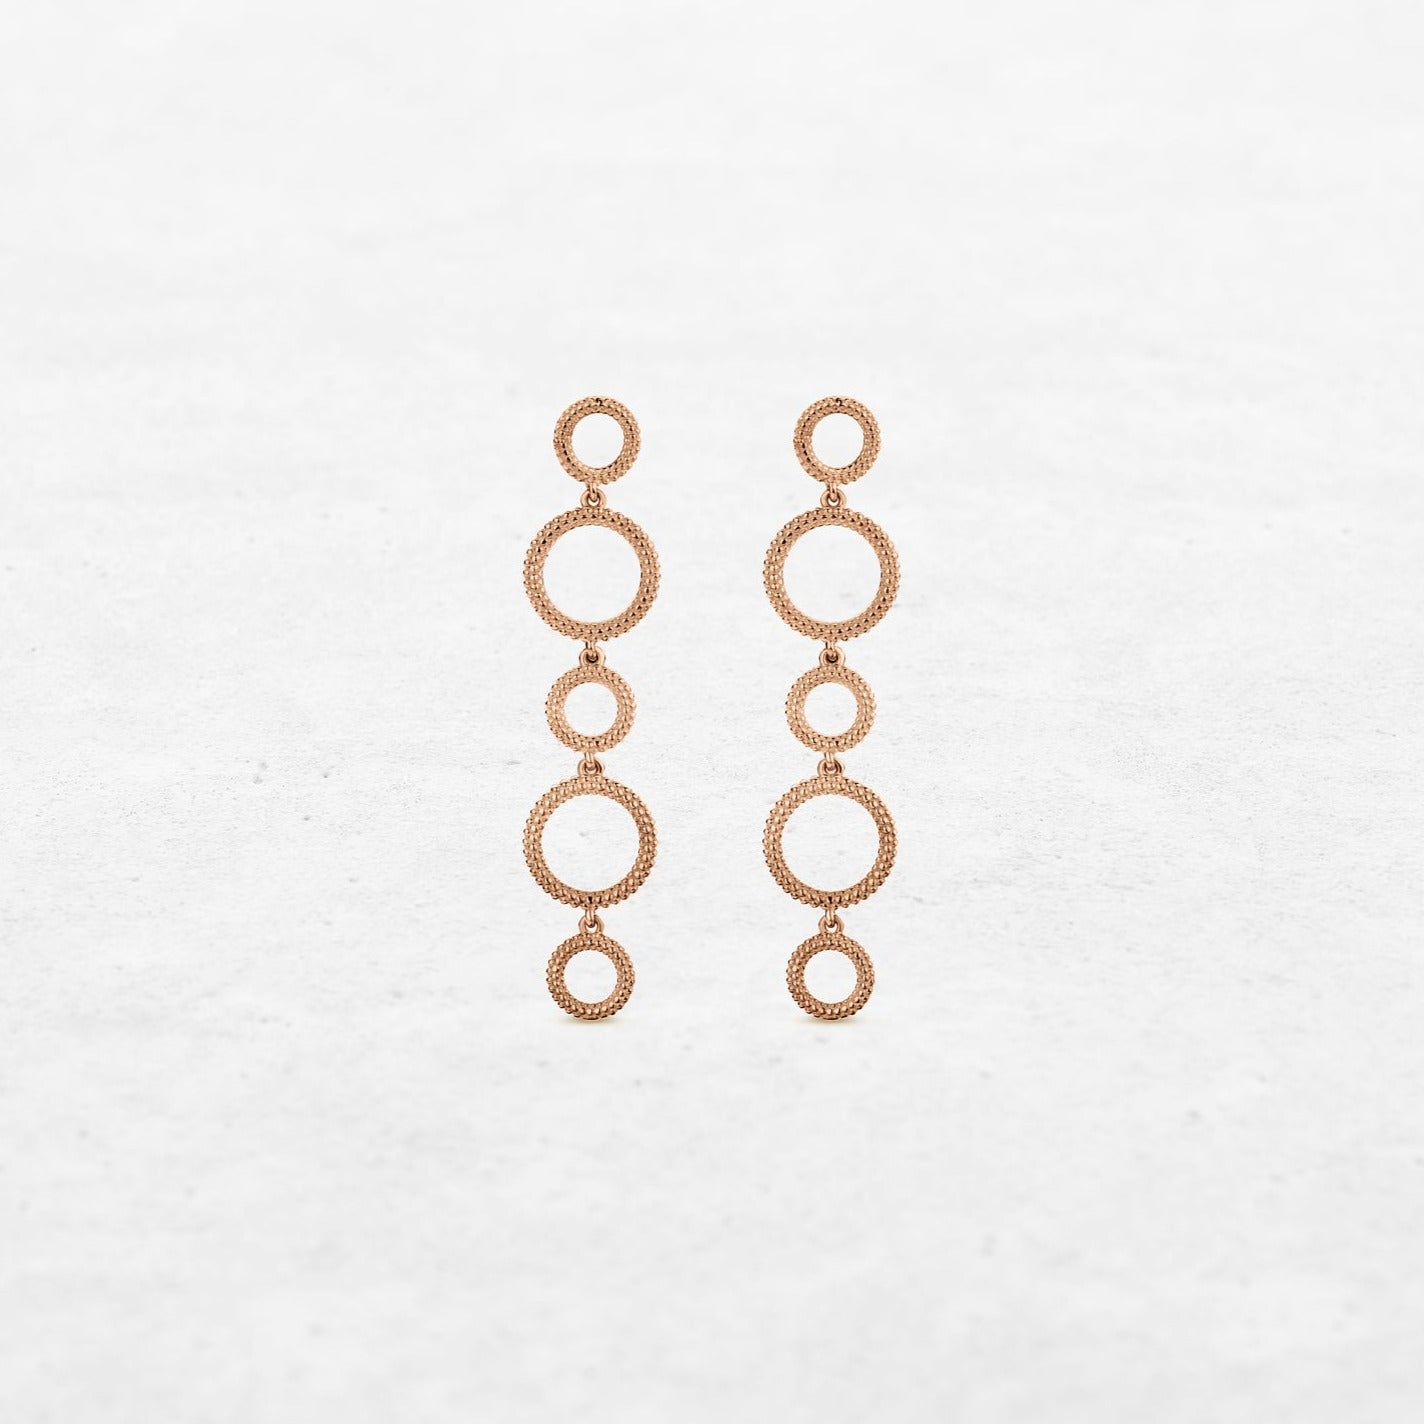 Circular earrings with different sizes in rose gold made by O! Jewelry